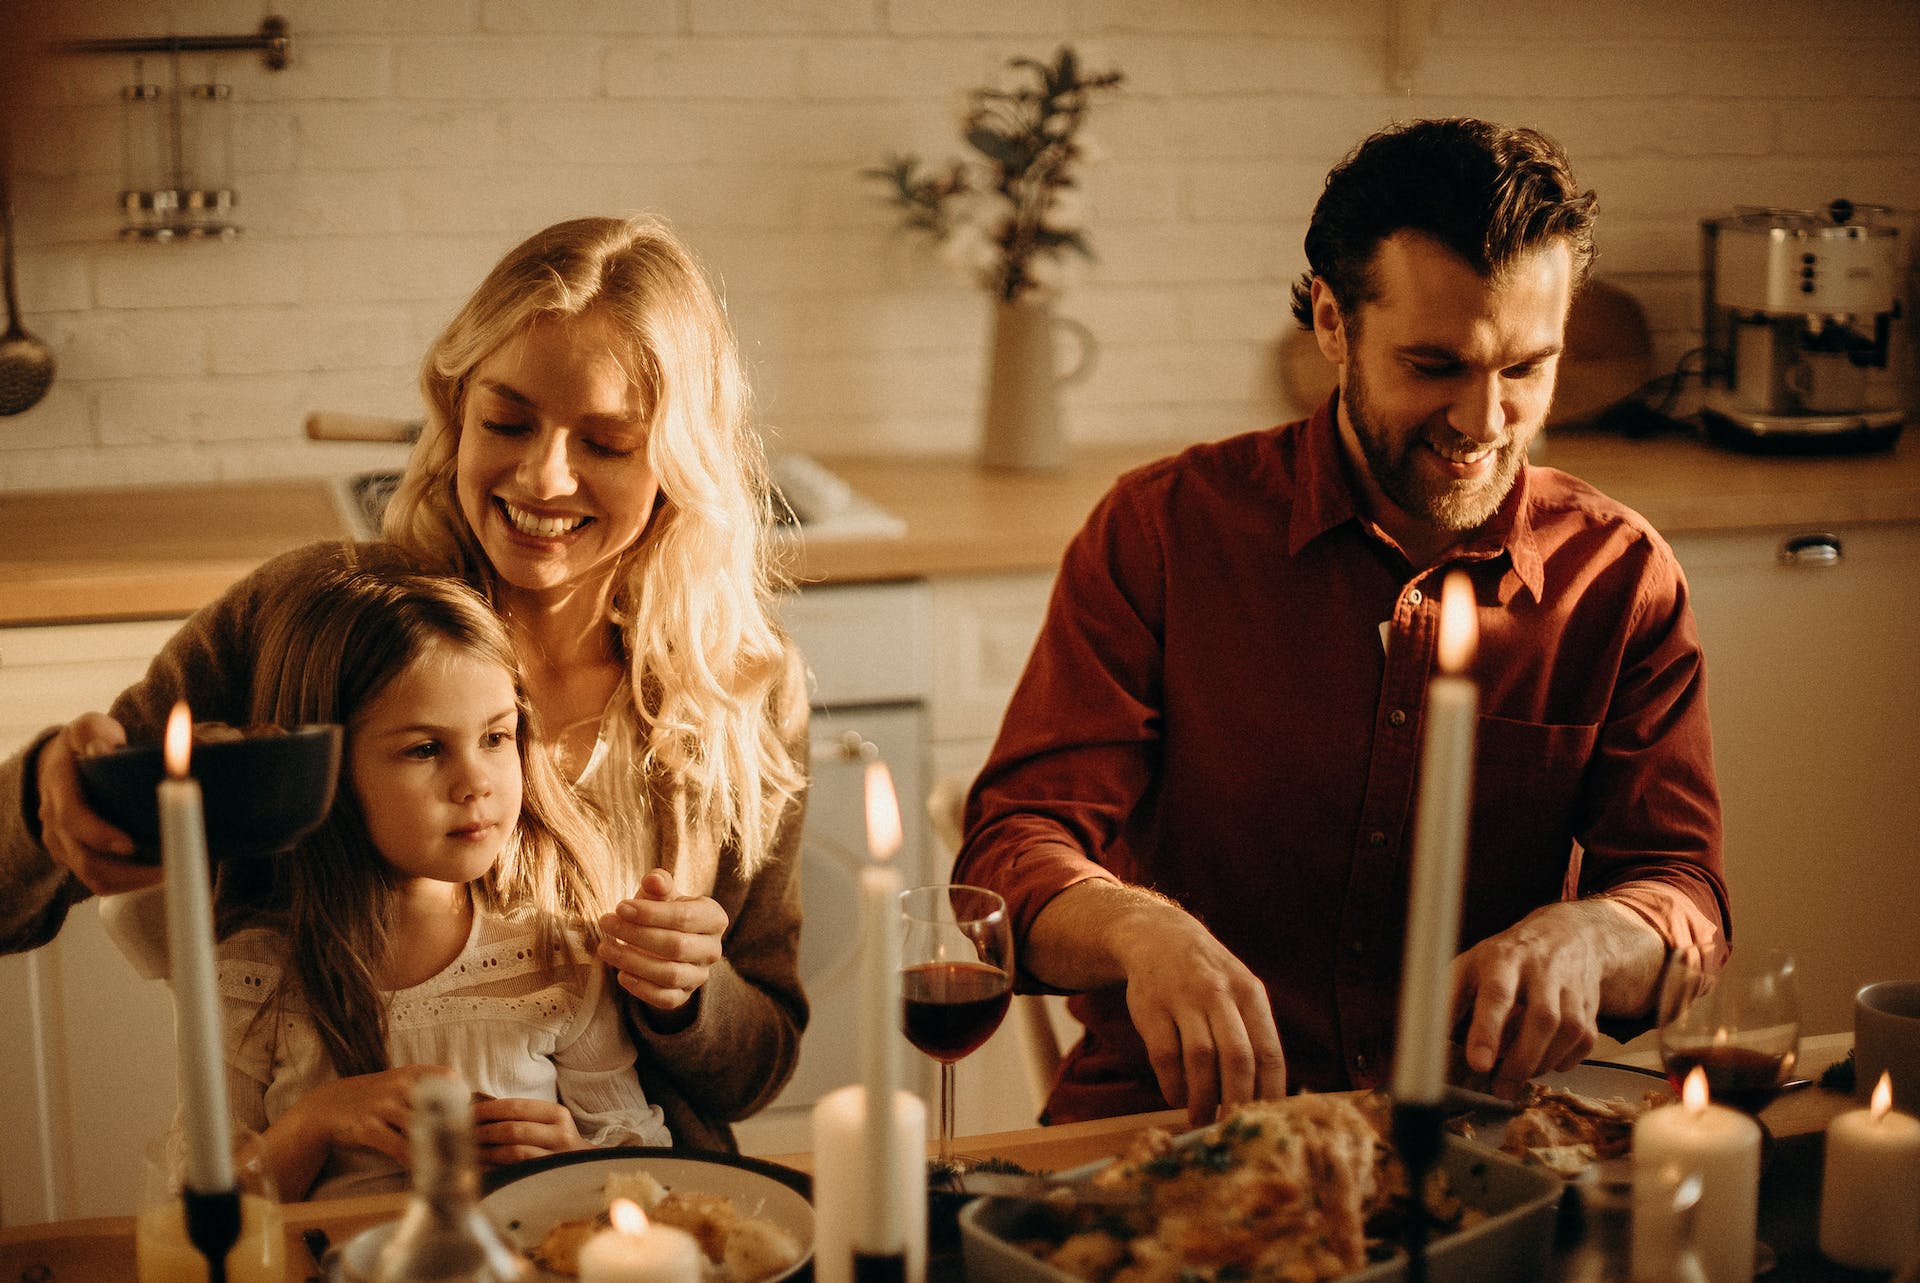 A couple and their daughter pictured at the dinner table | Source: Pexels